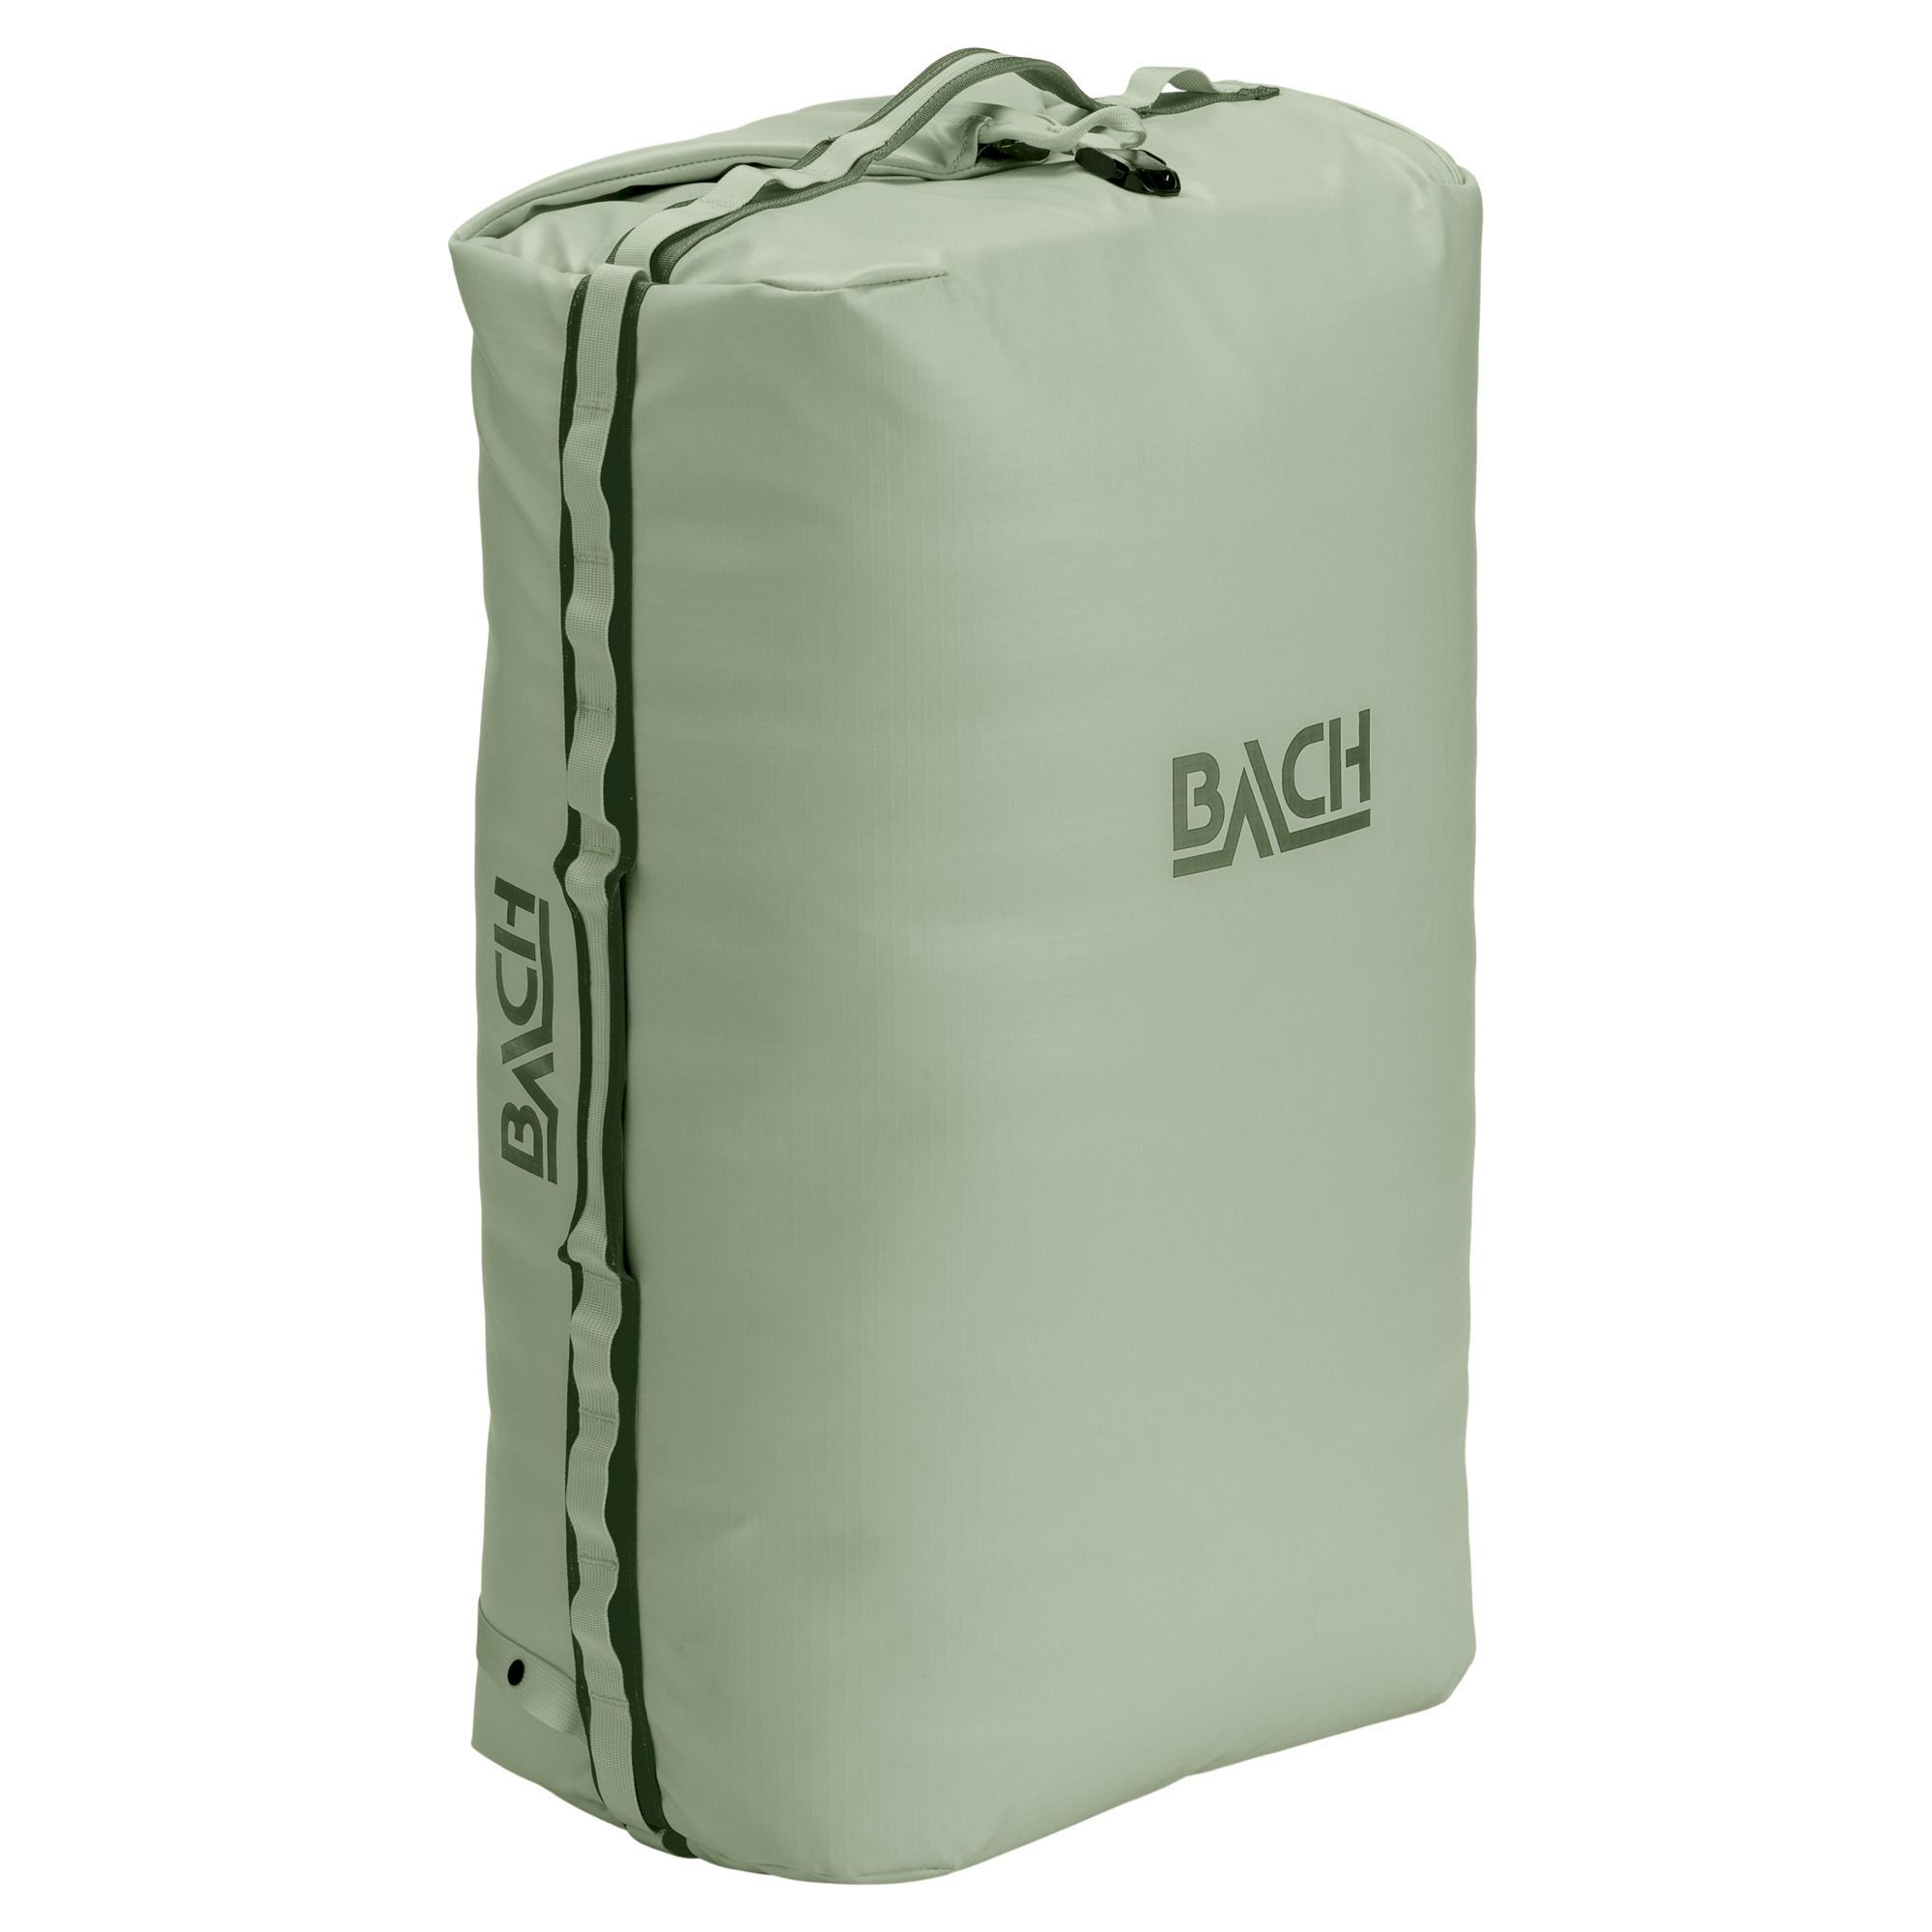 Bach Dr. Expedition 60 - Duffel Bag | Hardloop